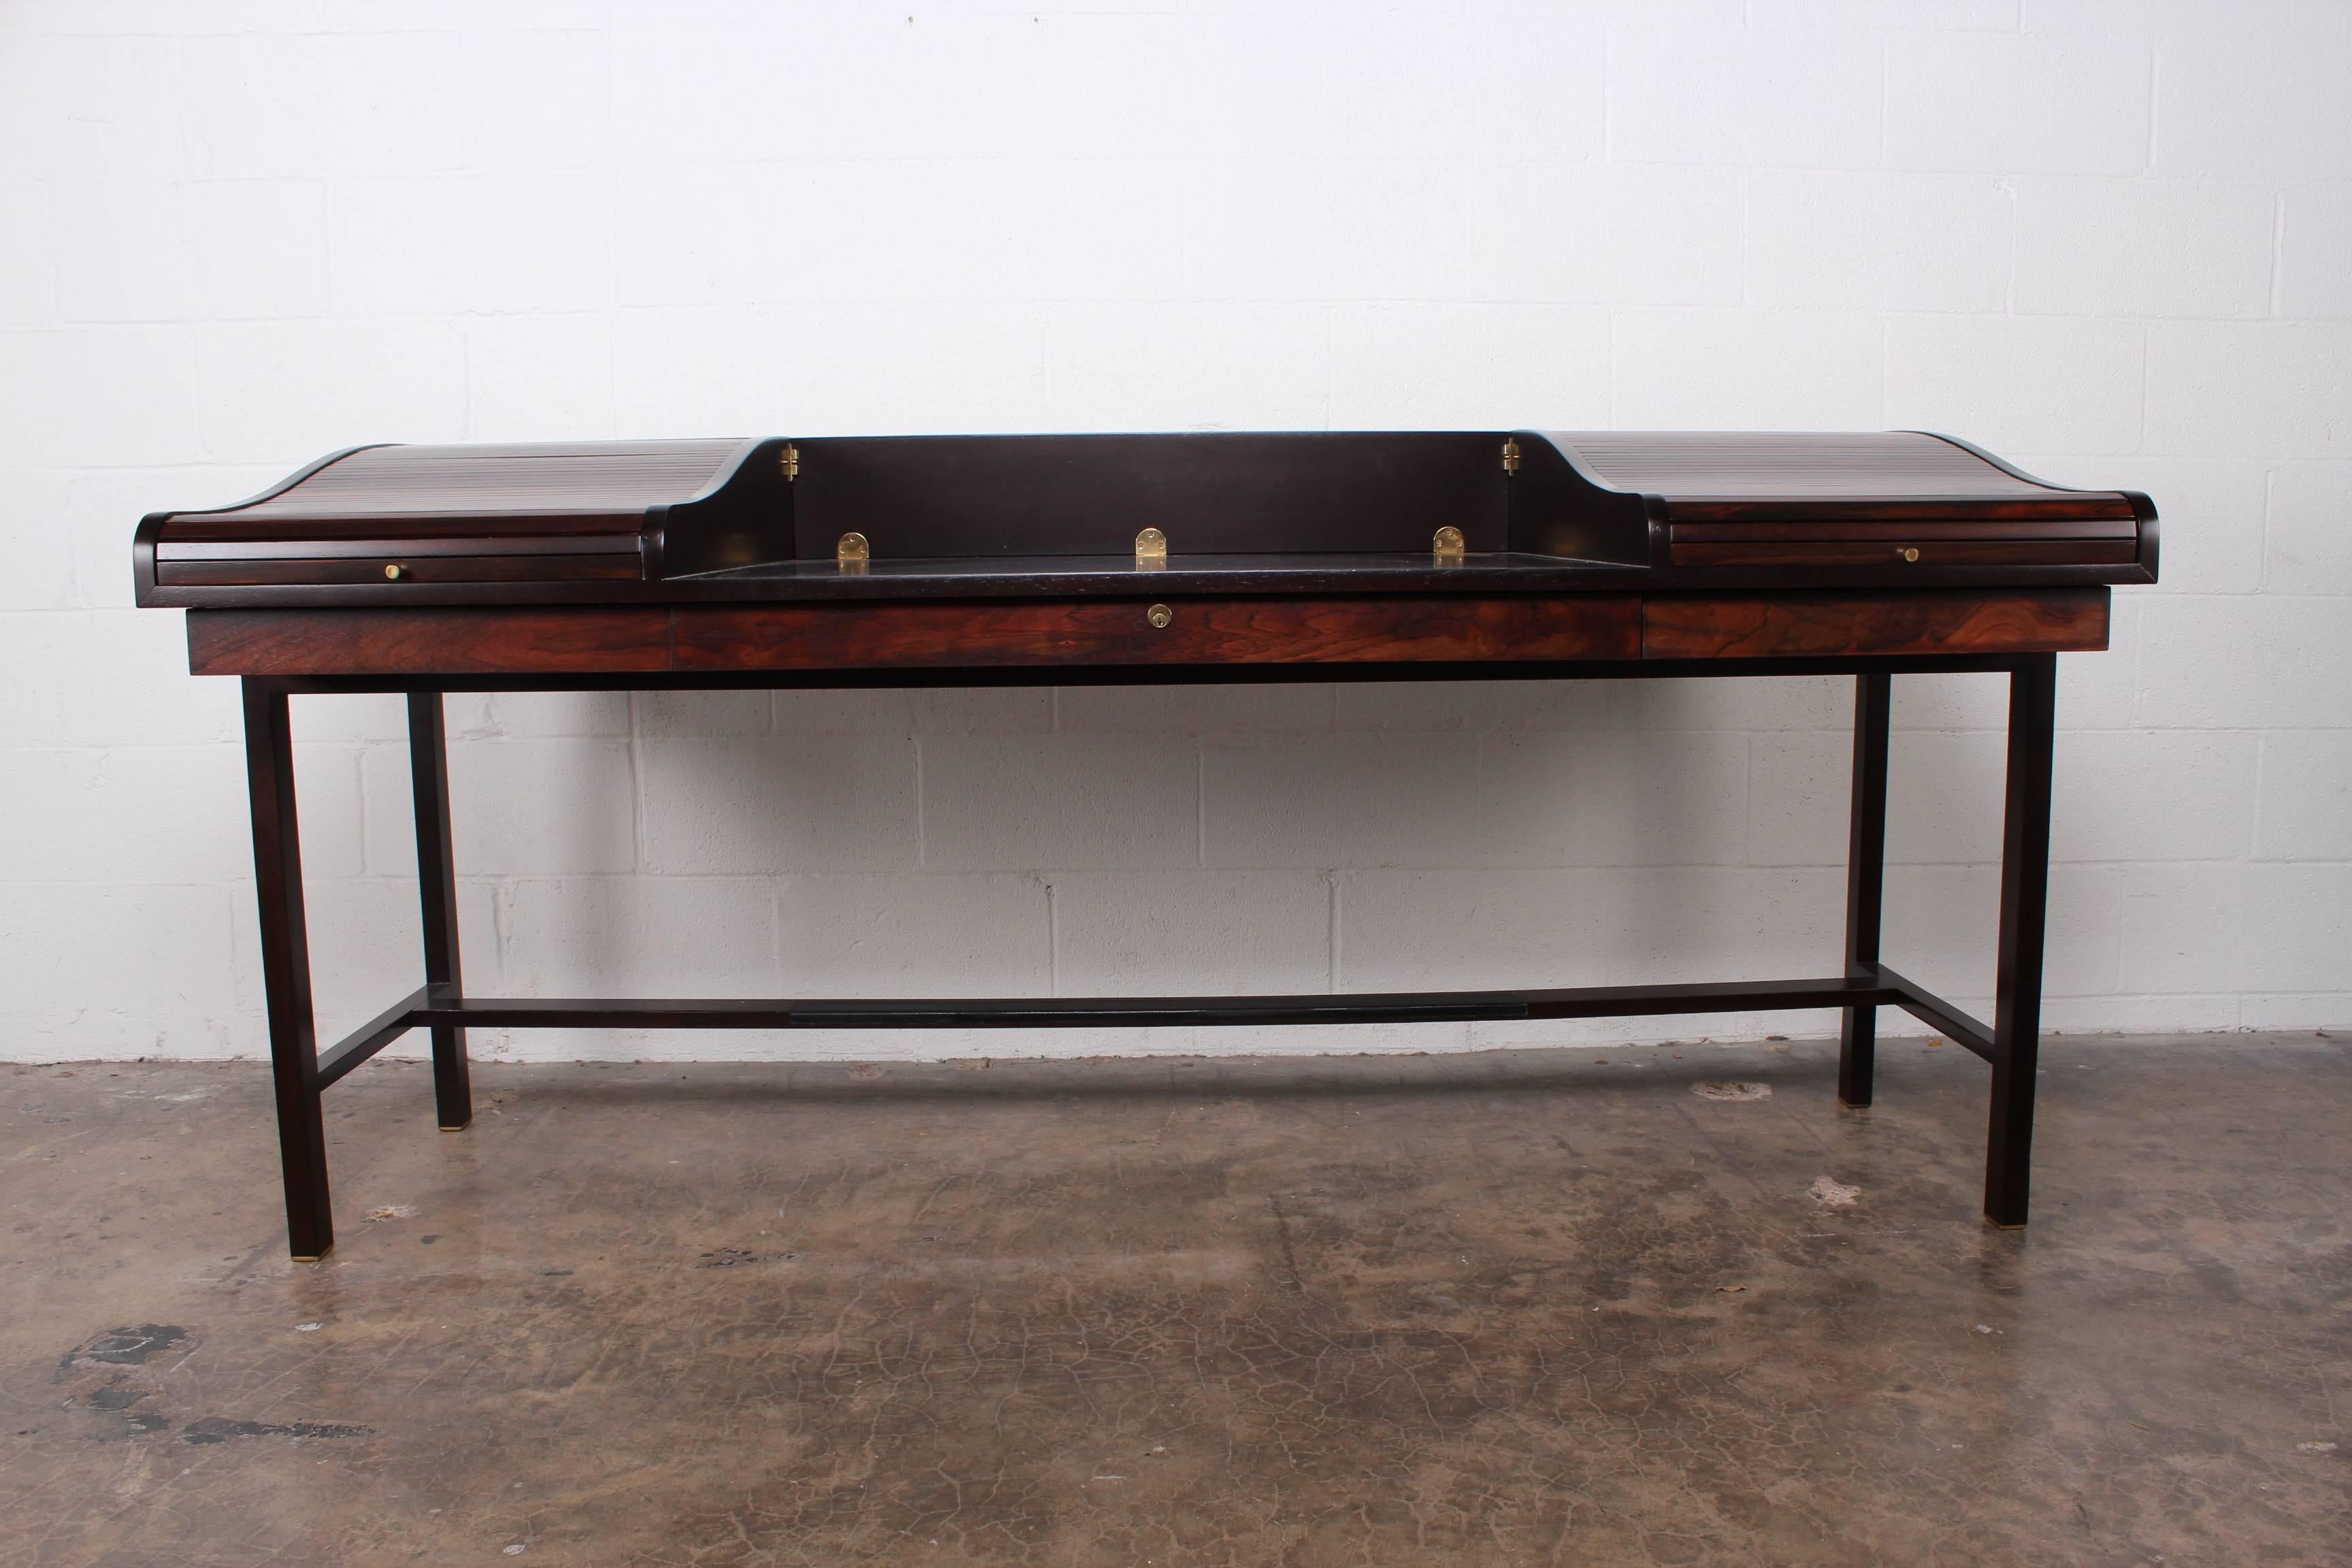 A rosewood tambour roll top desk with brass feet and leather trim. Designed by Edward Wormley for Dunbar.